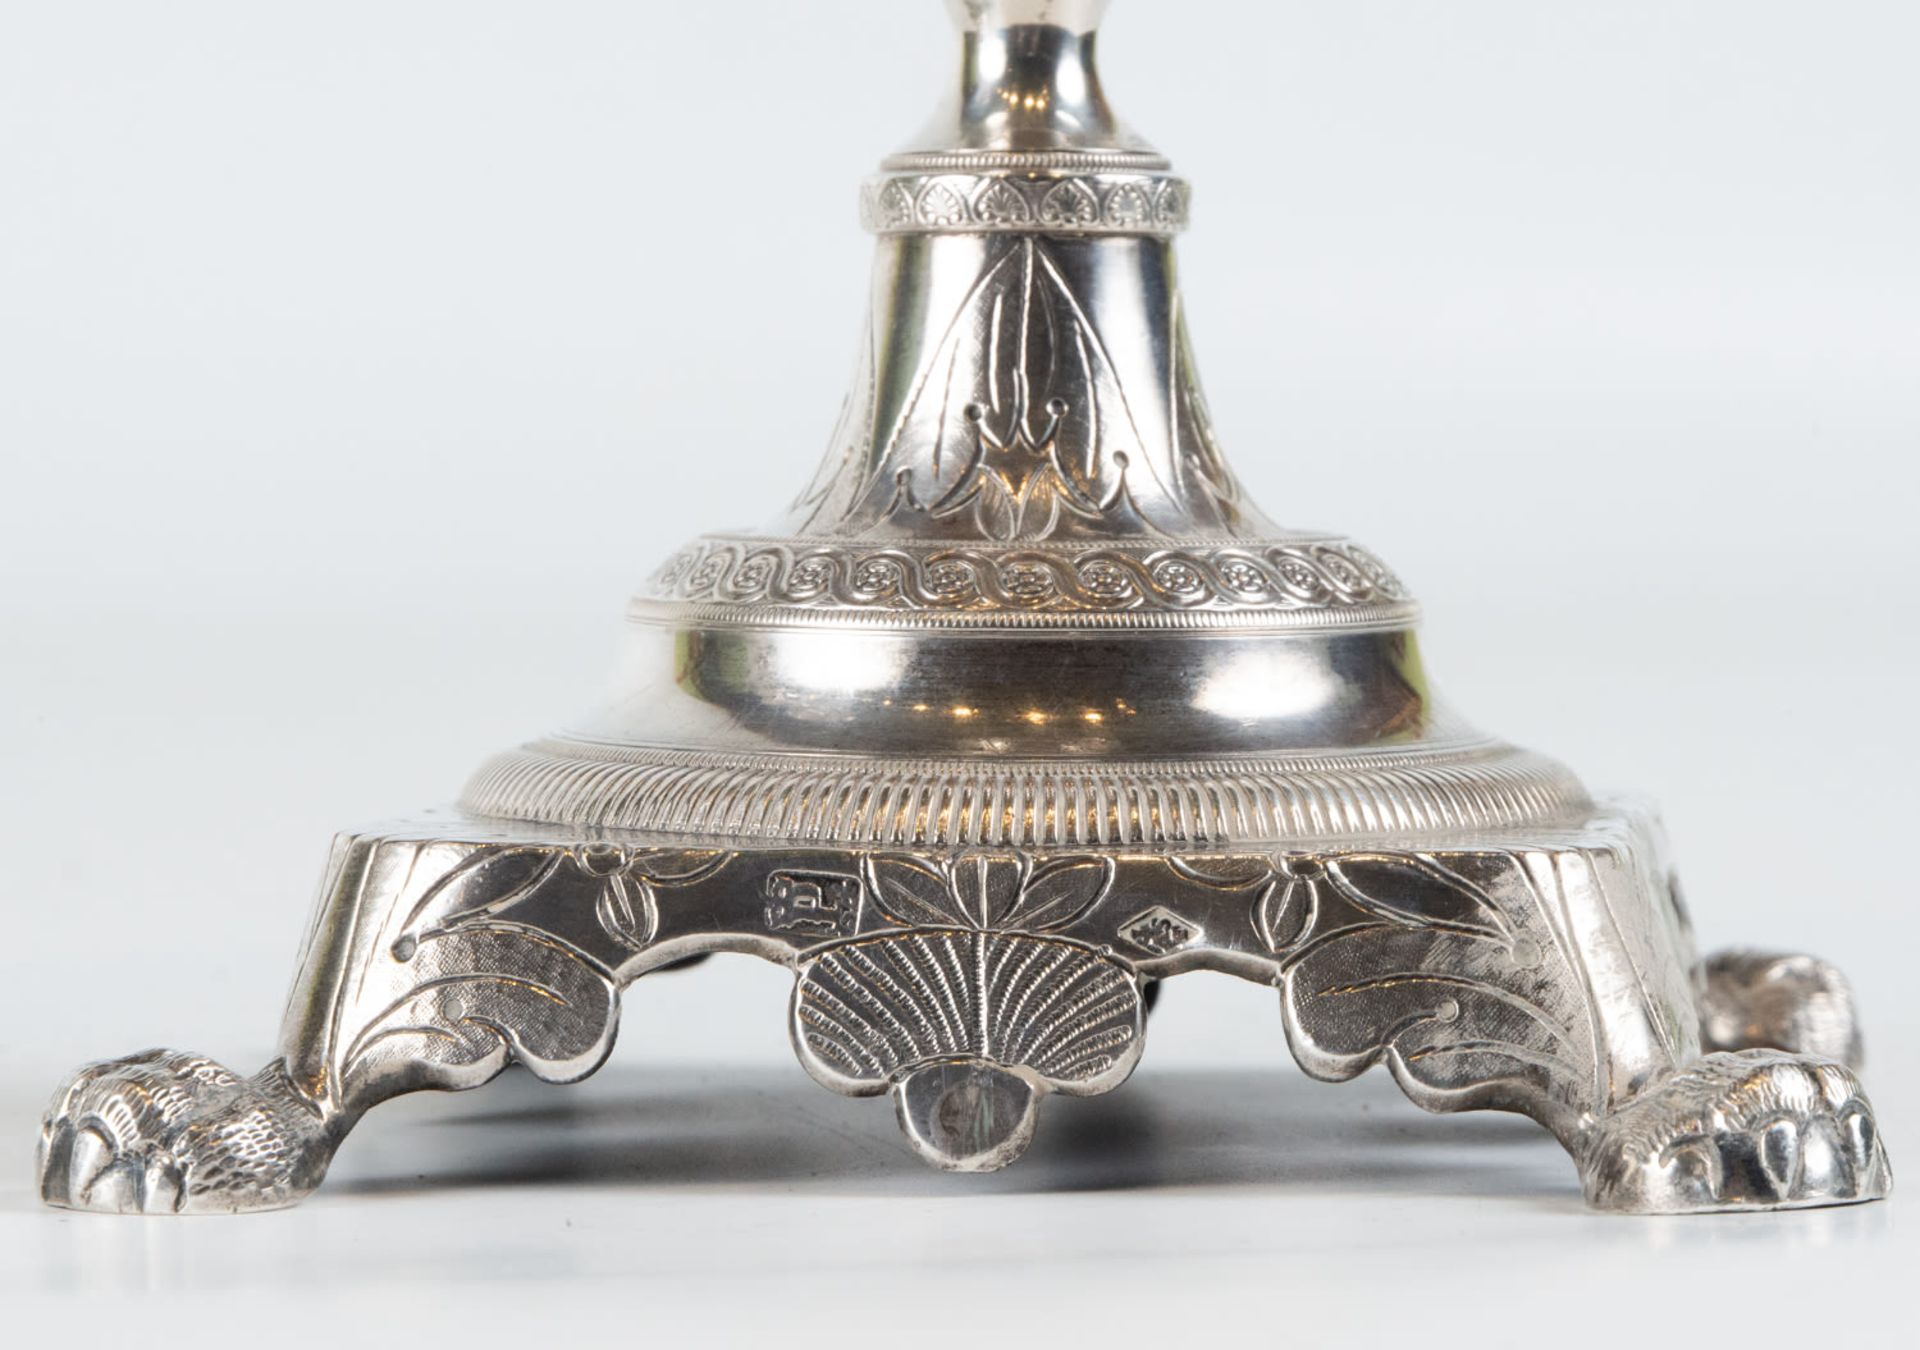 Pair of solid sterling silver candlesticks, 19th century - Image 2 of 9